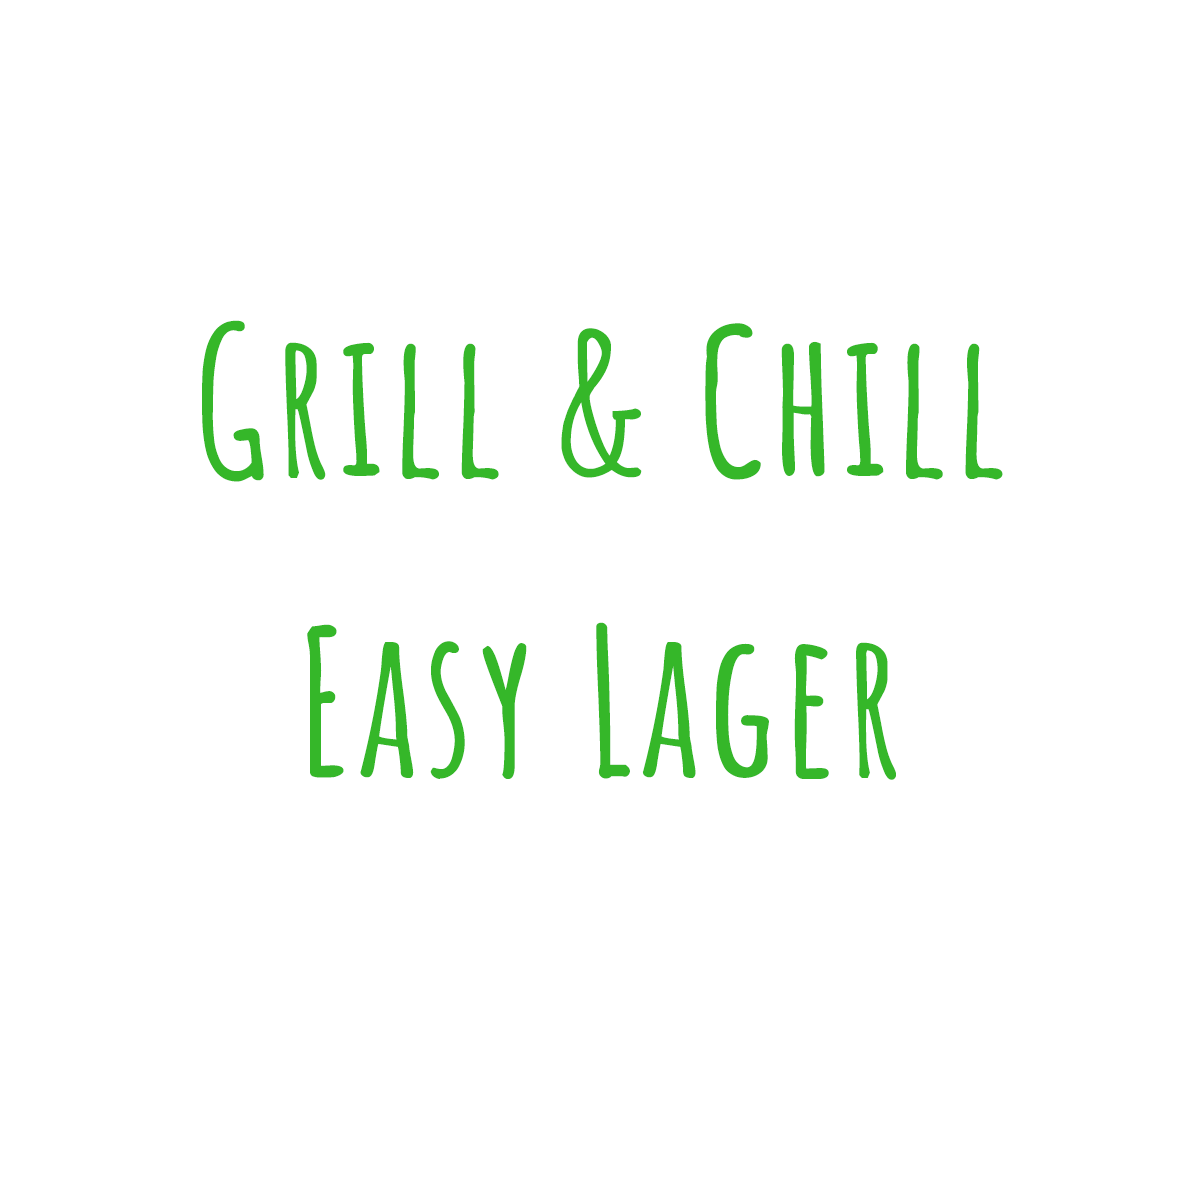 Grill & Chill Easy Lager